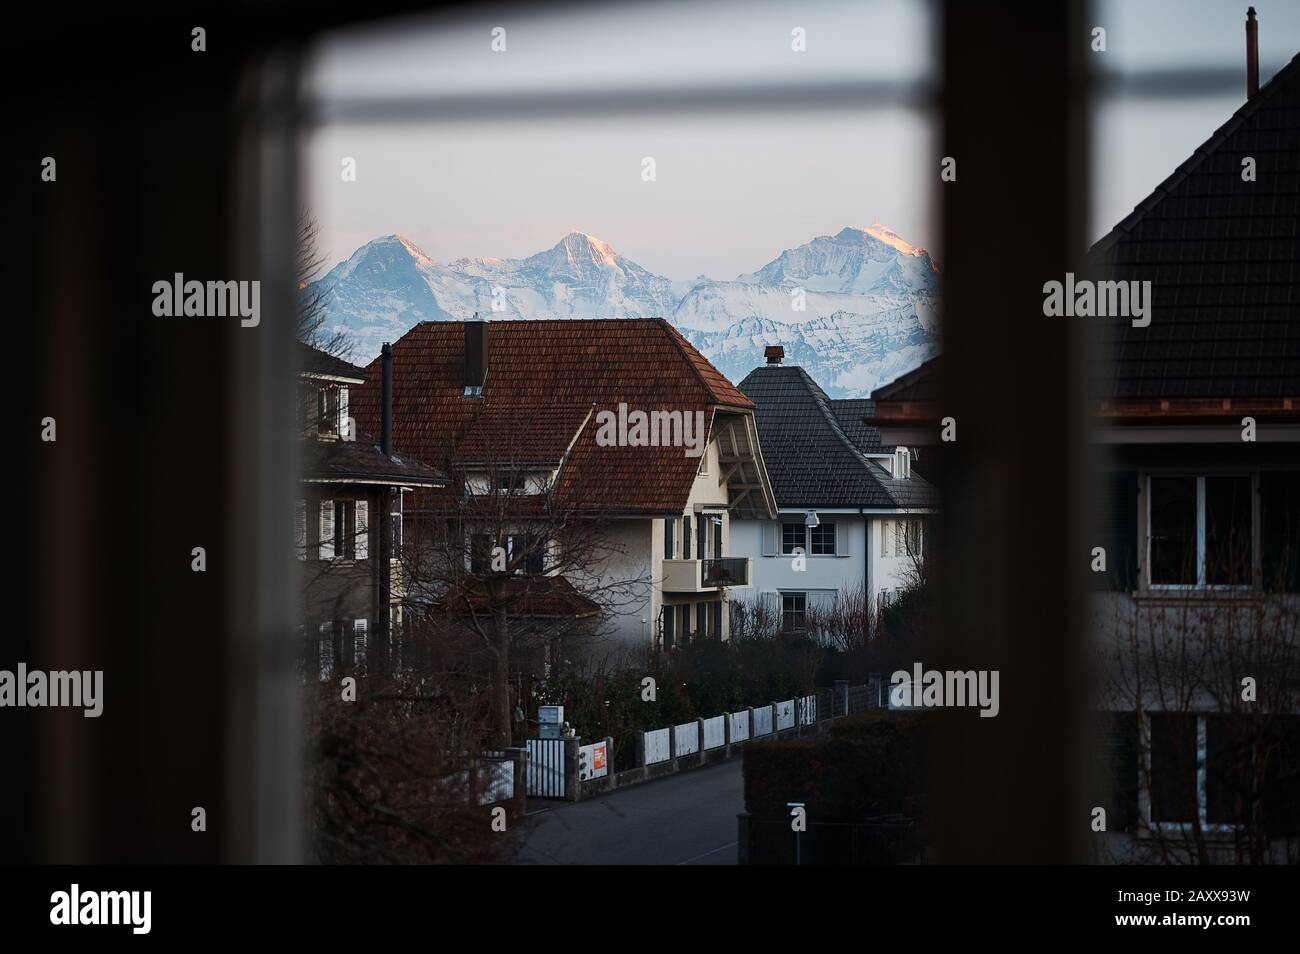 View from a window towards Eiger, Monch and Jungfrau. Thun, Switzerland Stock Photo